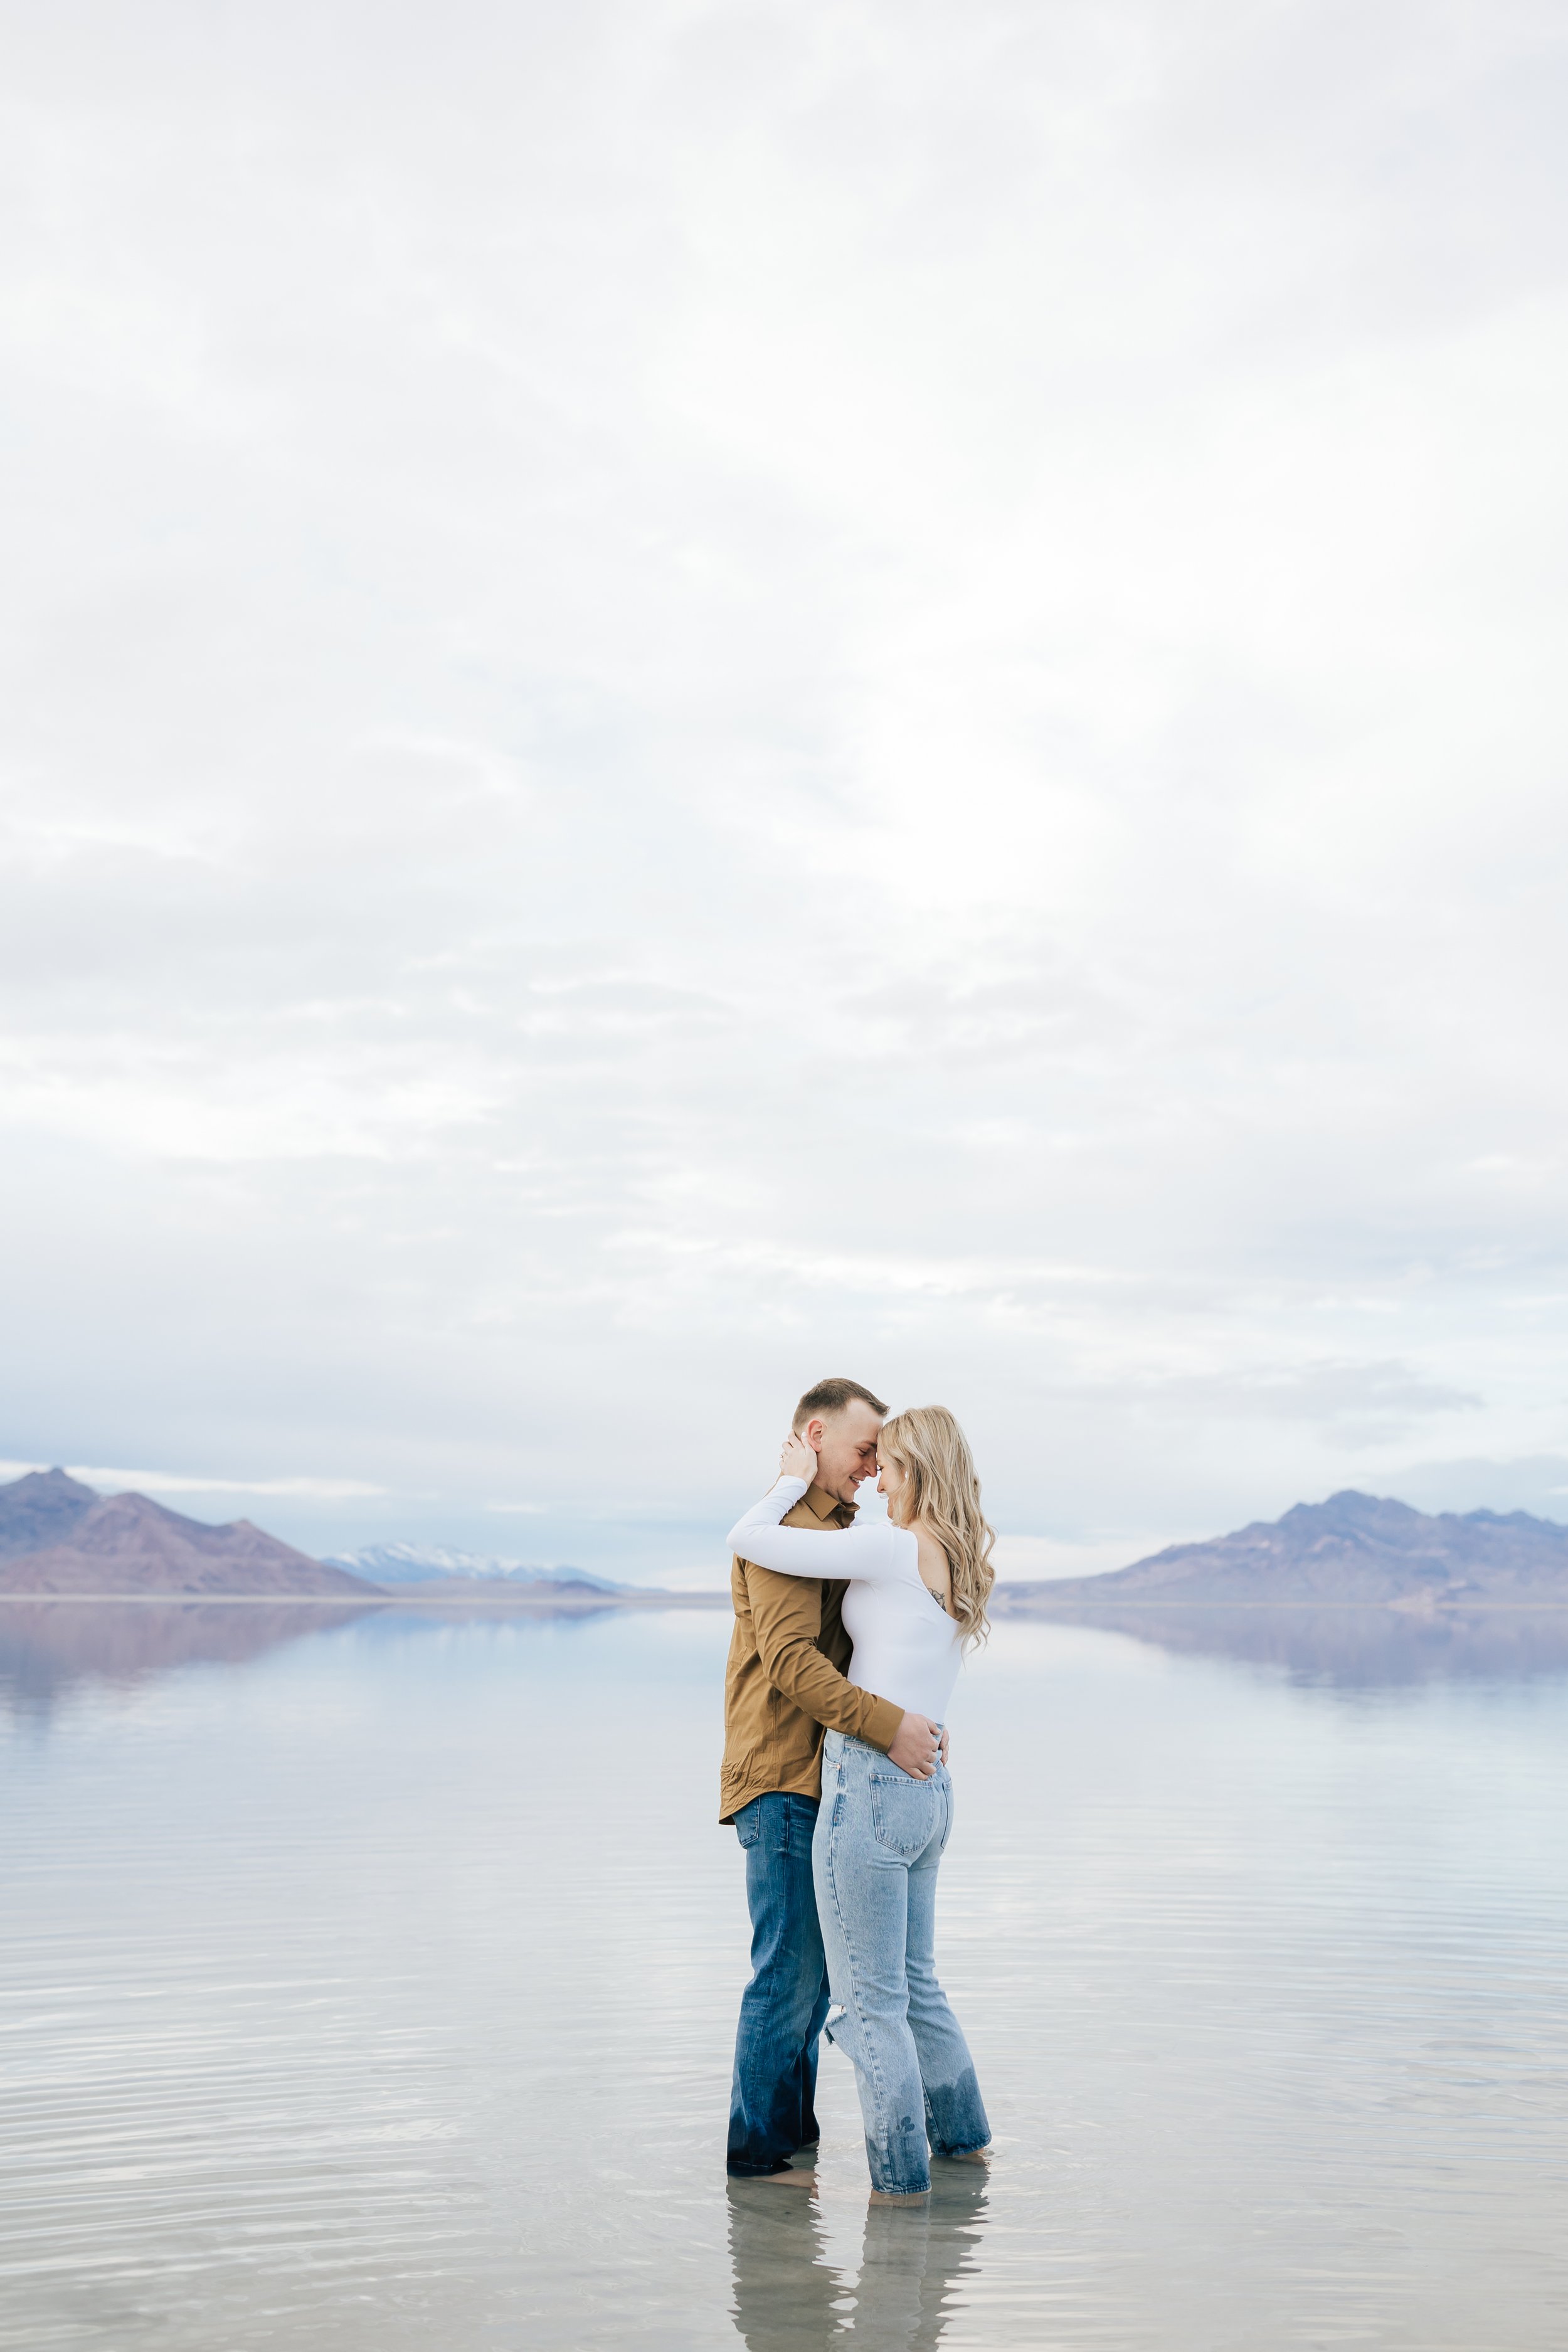  At the Bonneville Salt Flats, a couple stands in ankle-deep water in their jeans and embrace, Emily Jenkins Photography. engagement inspiration UT dream engagement portraits #EmilyJenkinsPhotography #EmilyJenkinsEngagements #BonnevilleSaltFlats #Sal